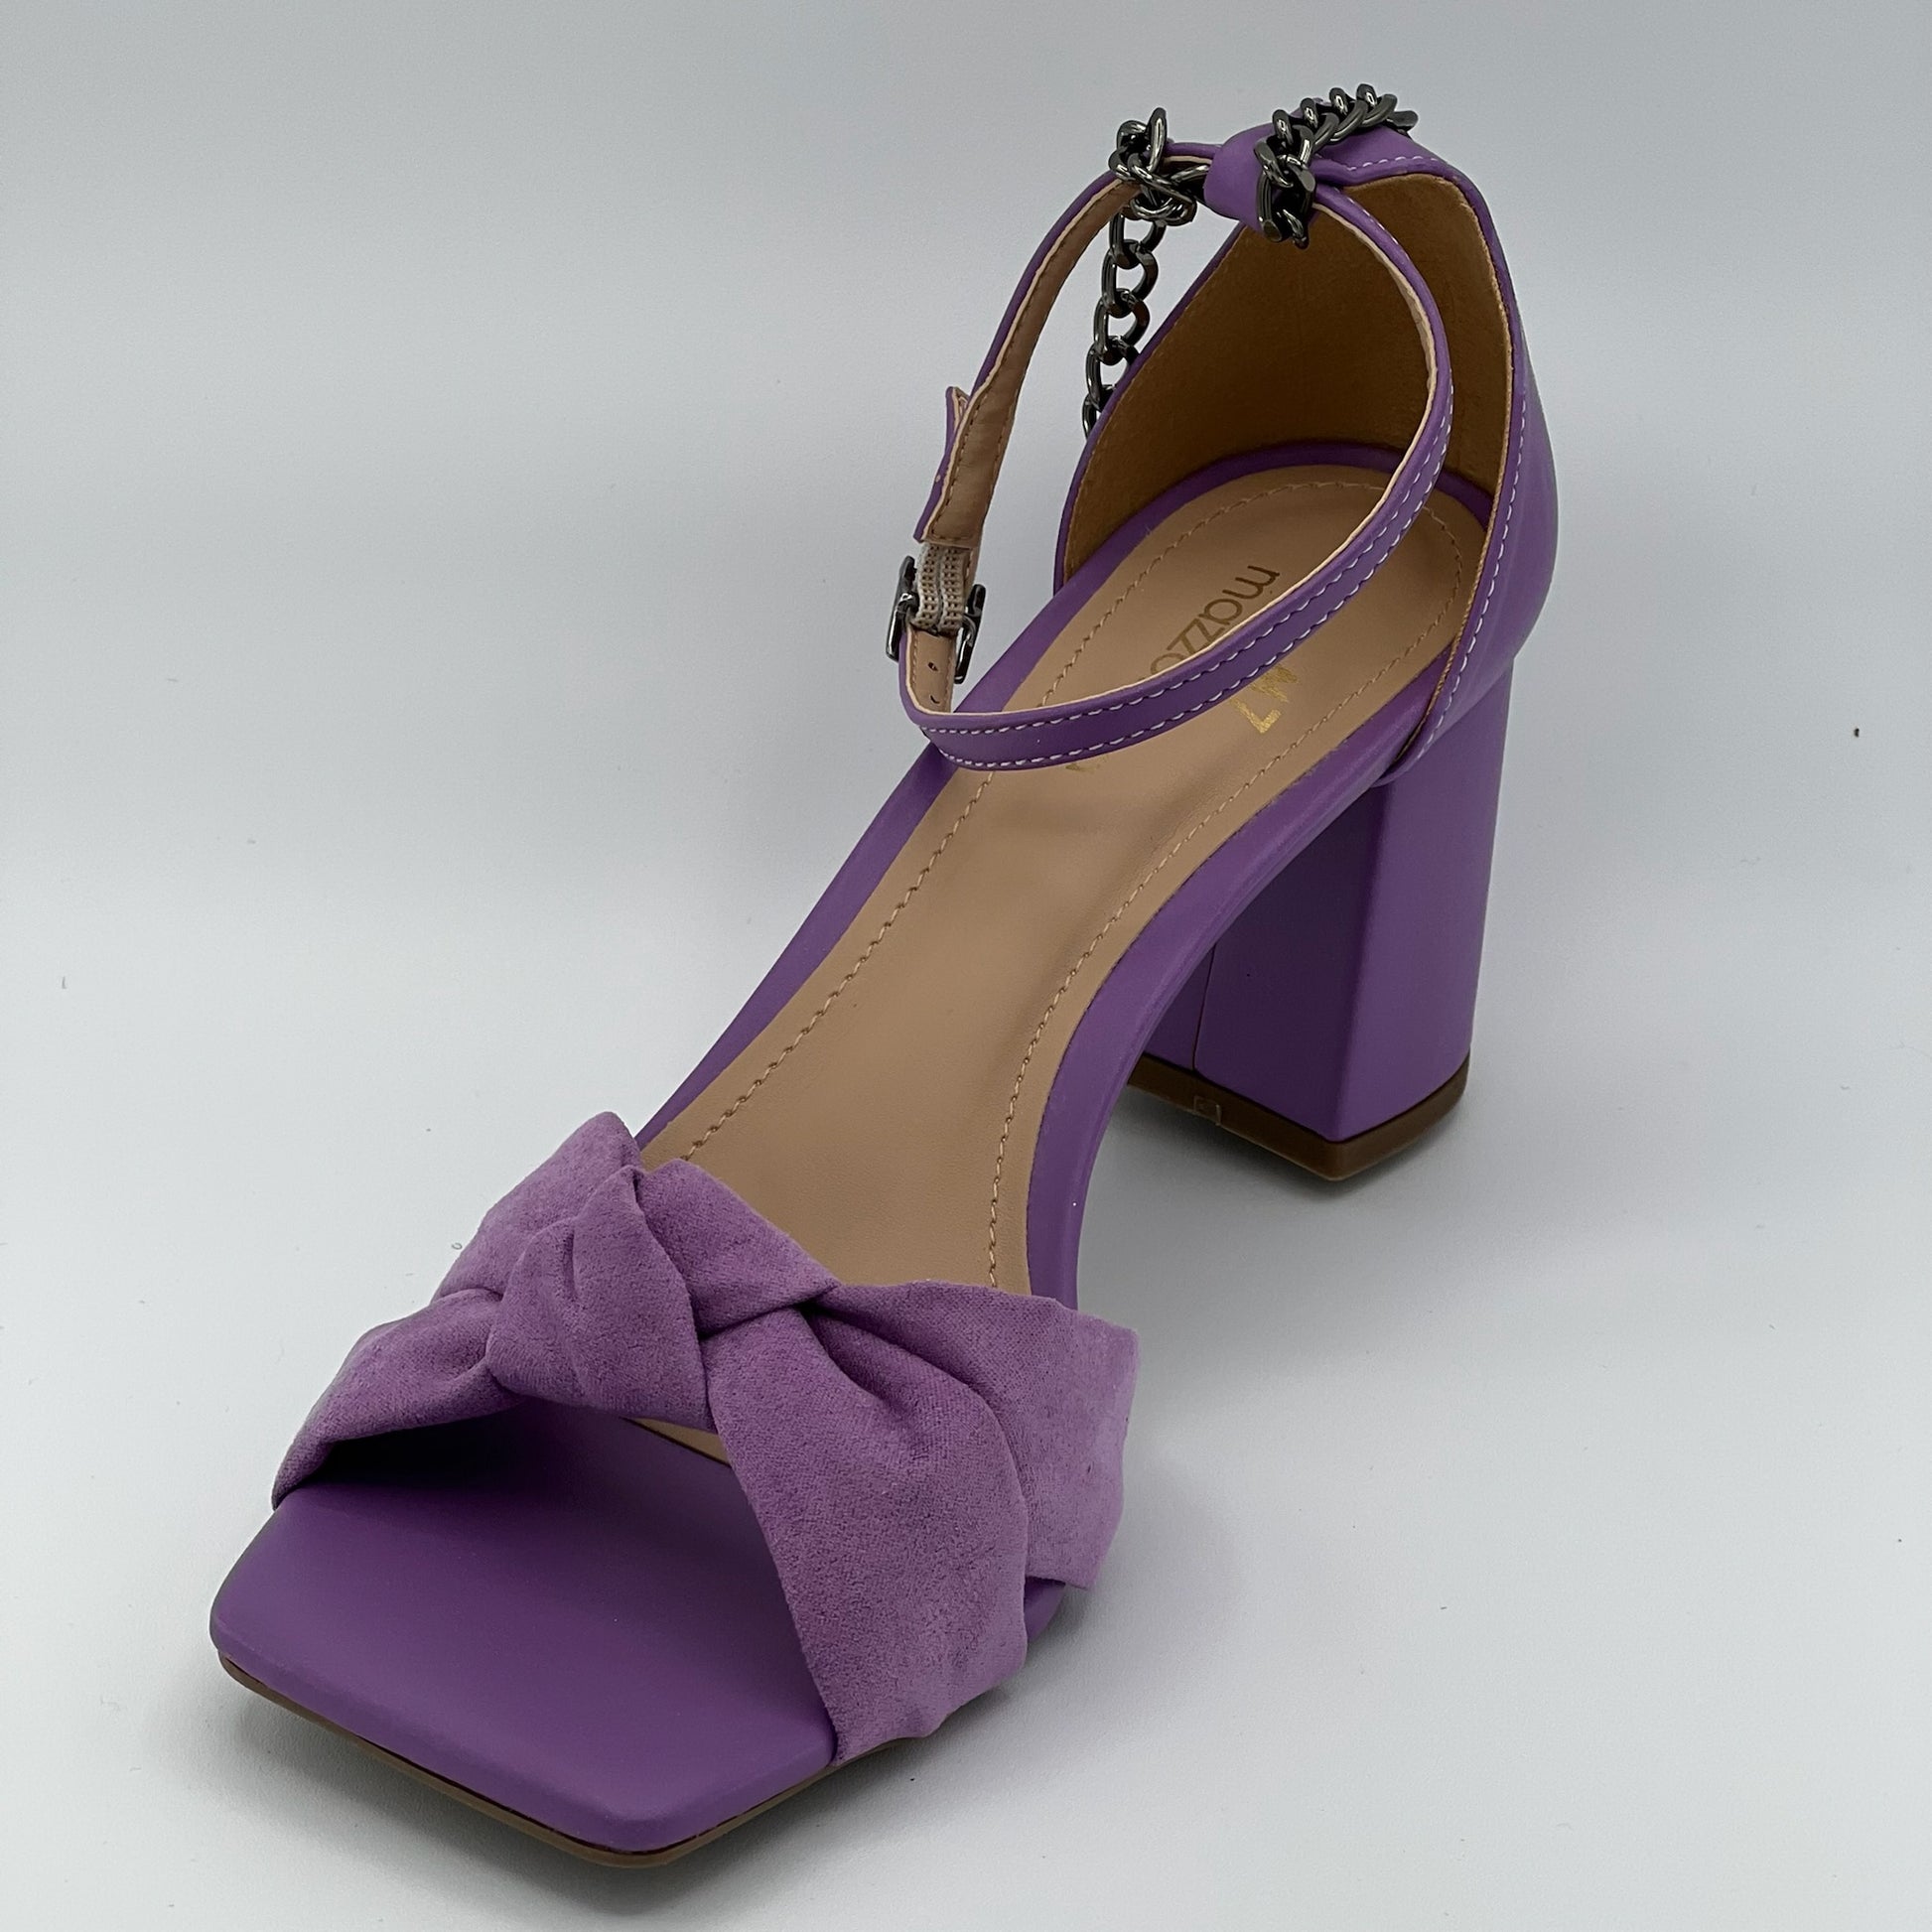 Light purple lavender sandals with chain accent, block hill, closure in the back.